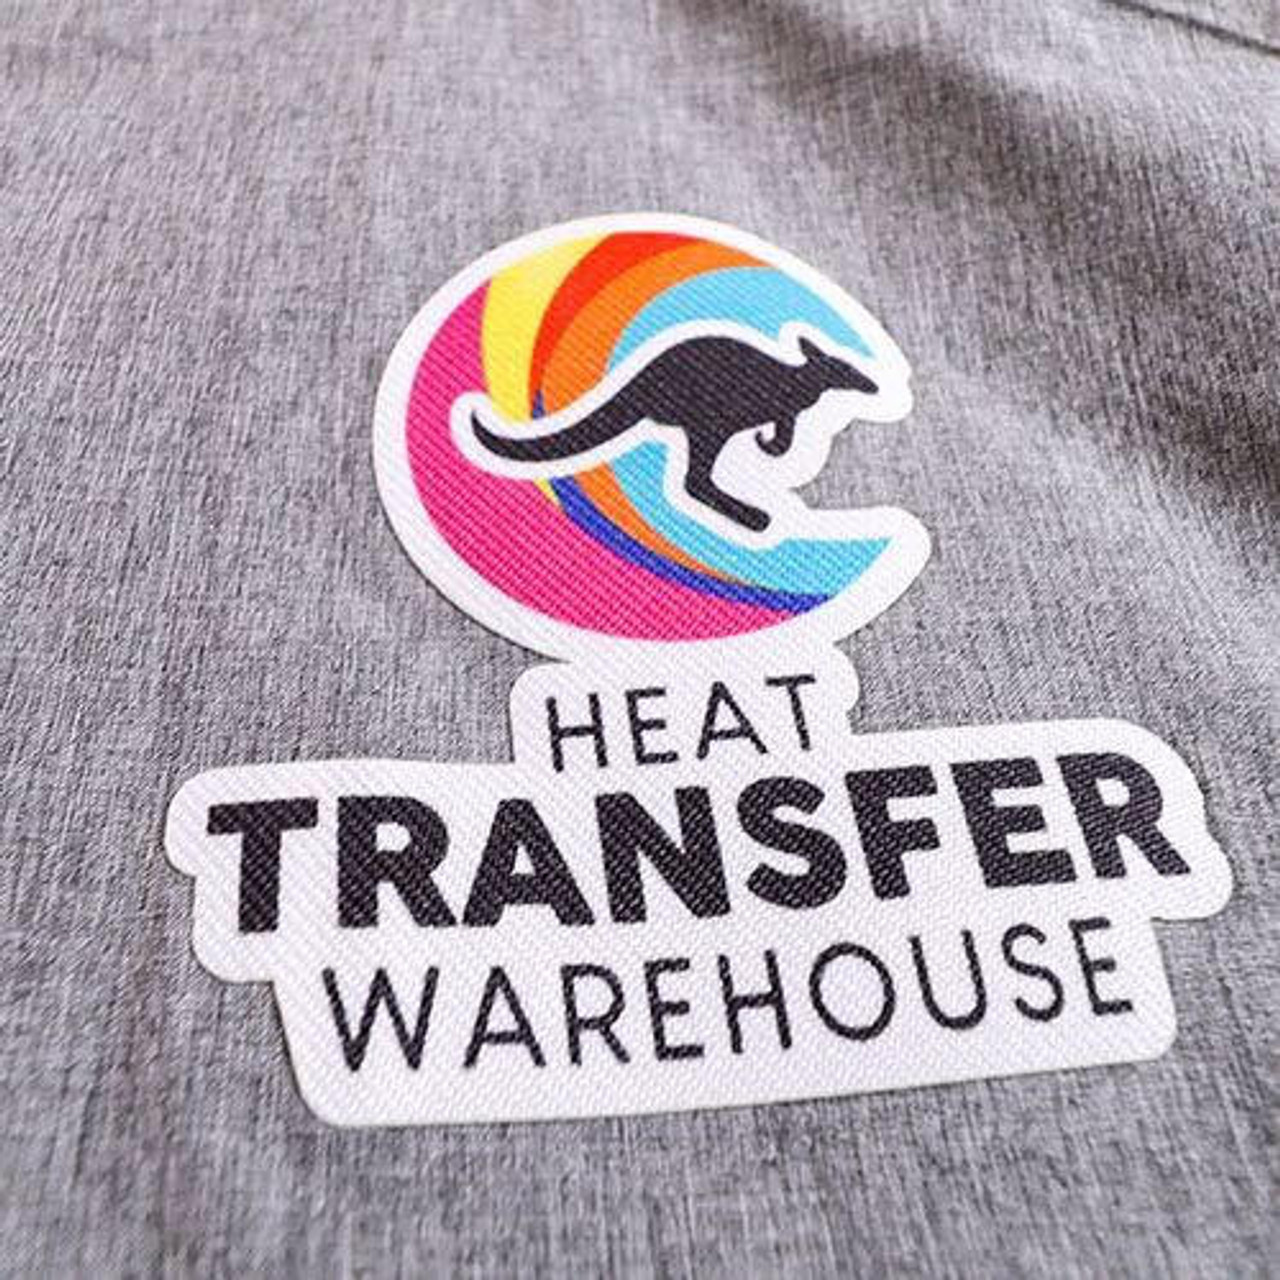 Dye Sublimation Patches  Heat Transfer Warehouse